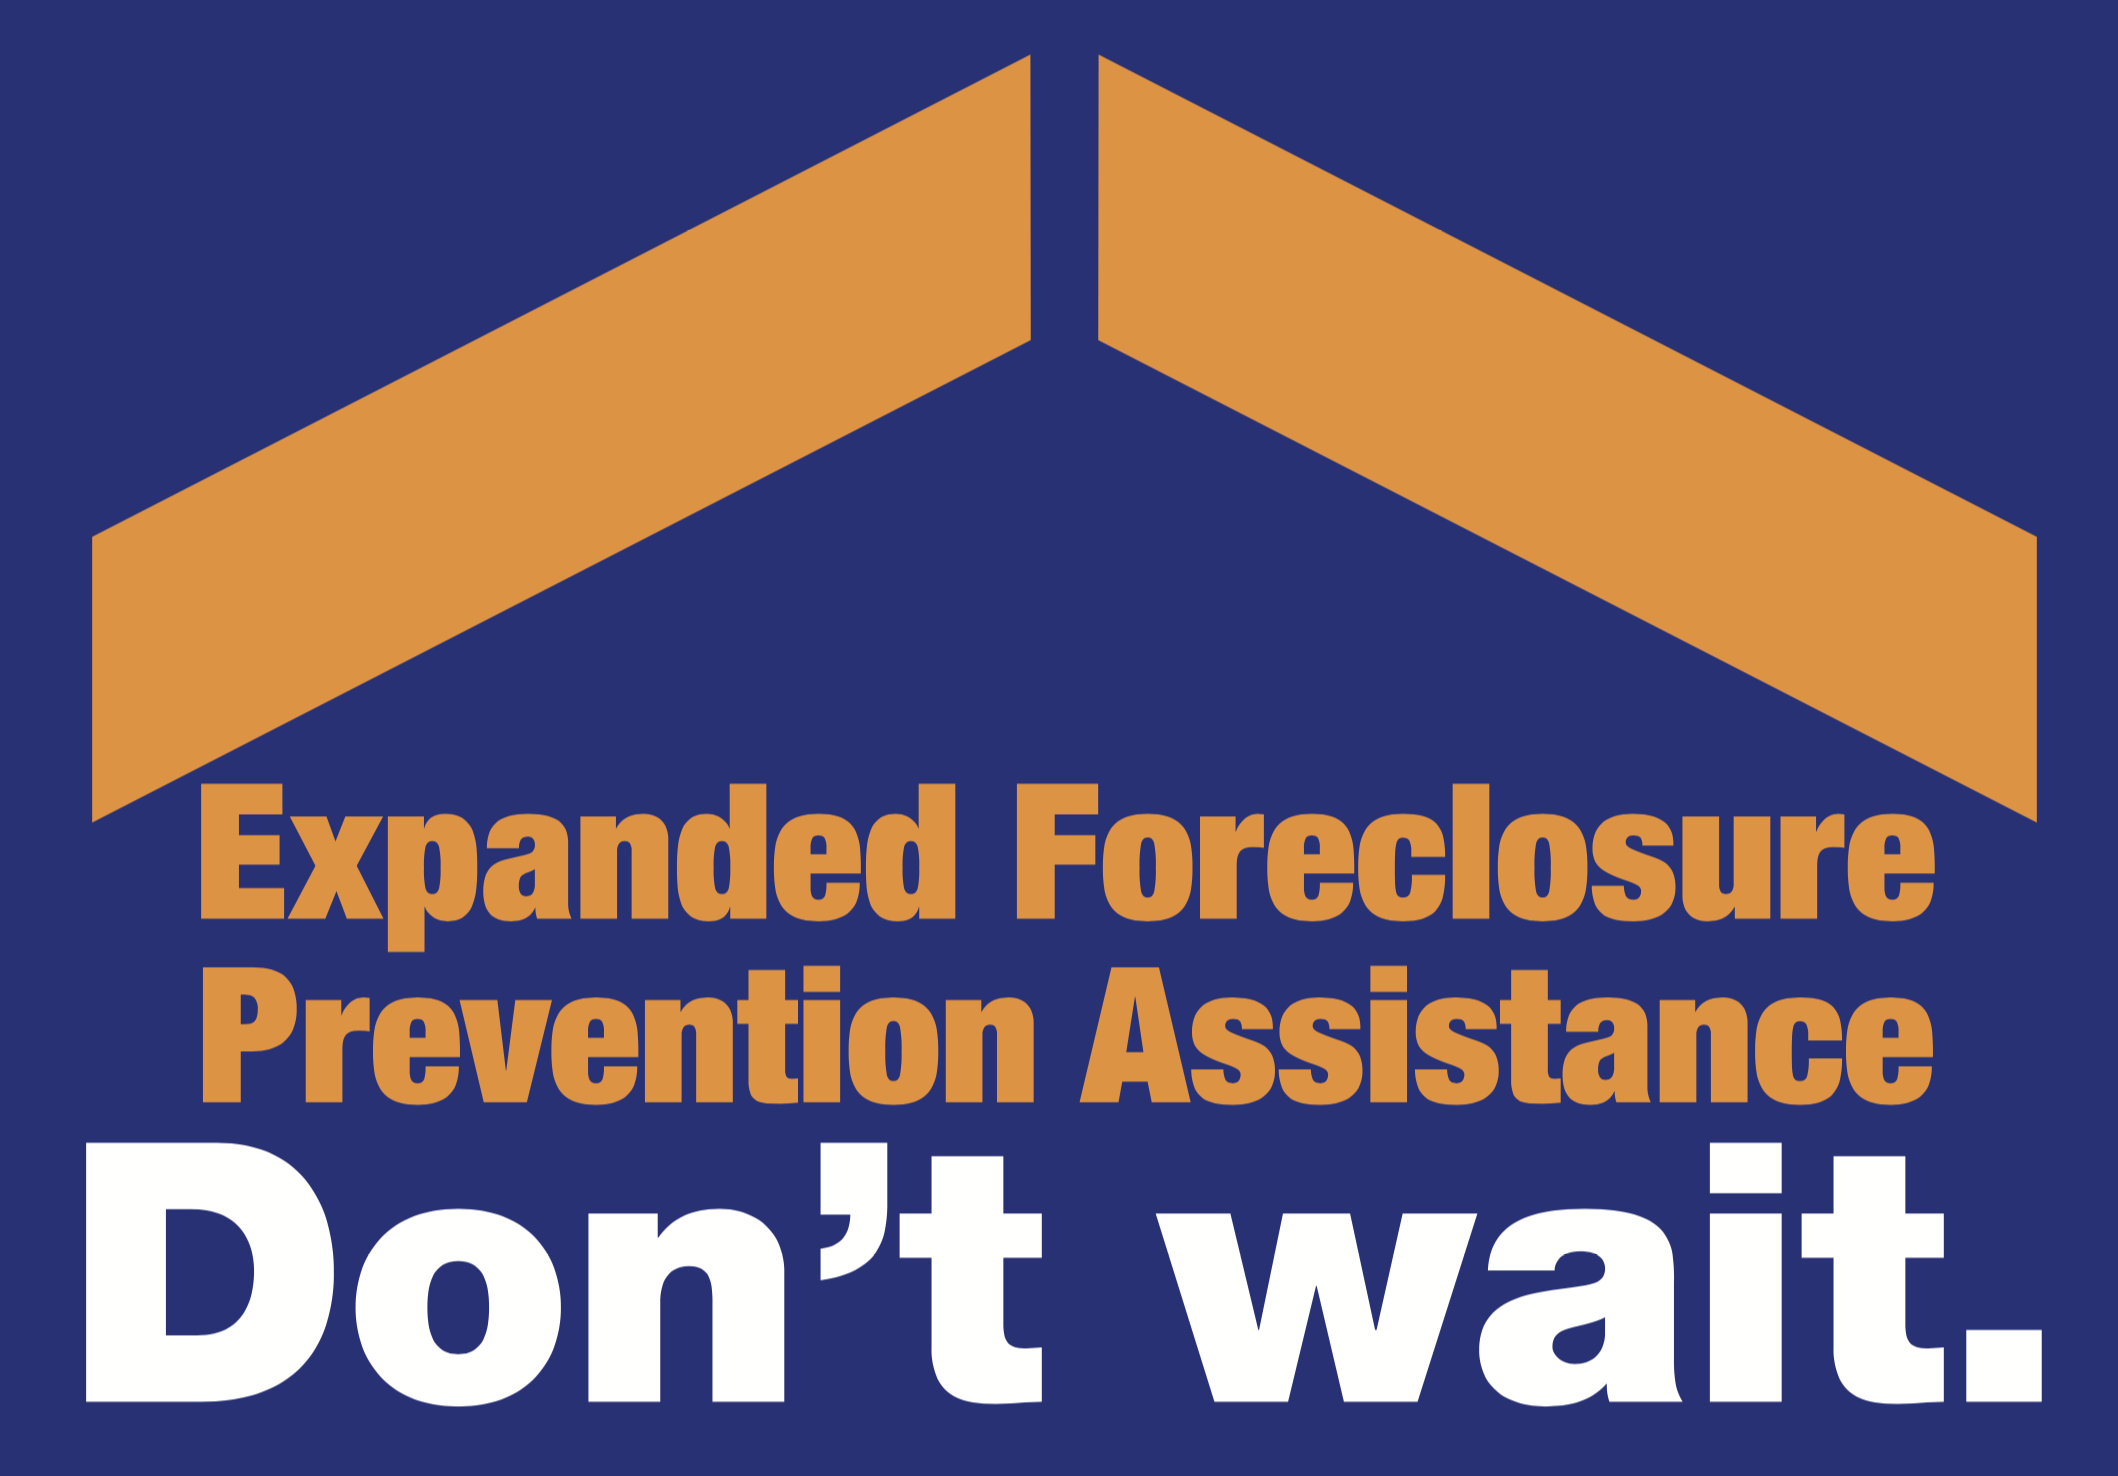 Expanded Foreclosure Prevention assistance: Don't wait. Hardest Hit Fund Rhode Island